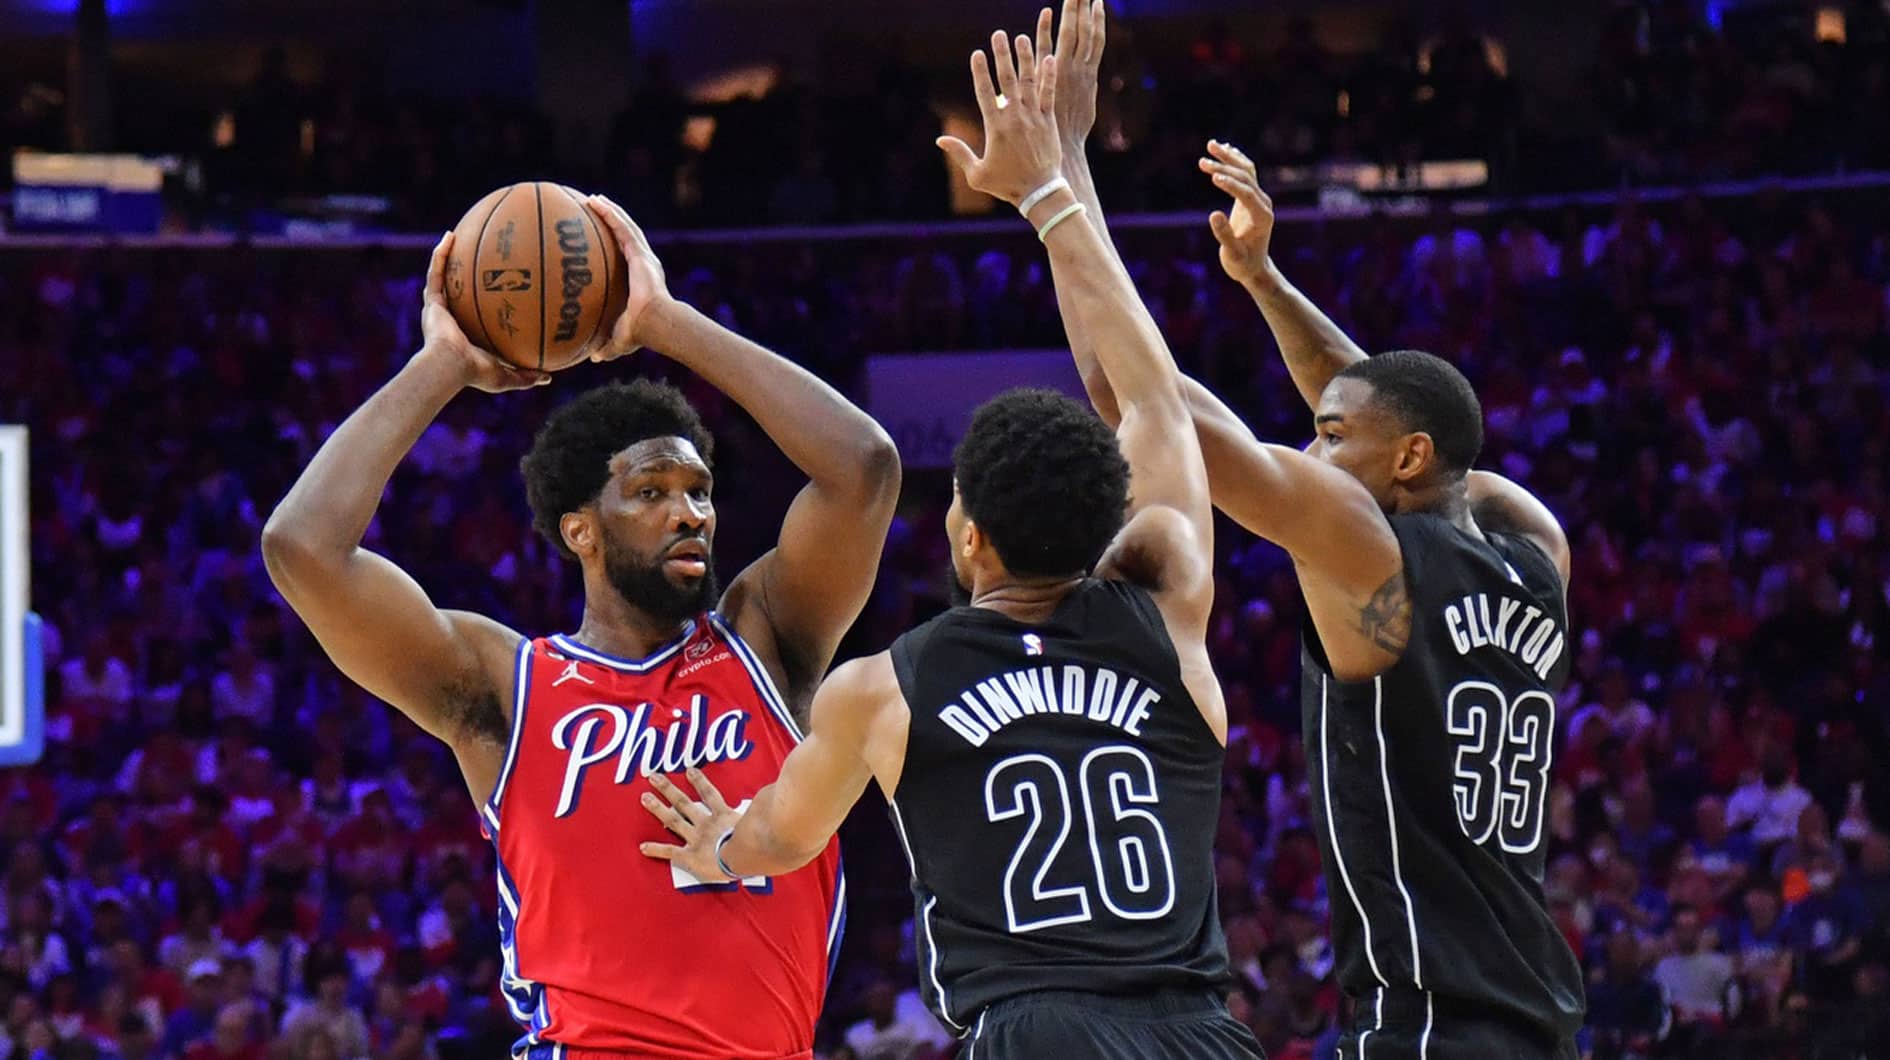 Apr 15, 2023; Philadelphia, Pennsylvania, USA; Philadelphia 76ers center Joel Embiid (21) is double-teamed by Brooklyn Nets guard Spencer Dinwiddie (26) and center Nic Claxton (33) during the third quarter of game one of the 2023 NBA playoffs at Wells Fargo Center. Mandatory Credit: Eric Hartline-USA TODAY Sports